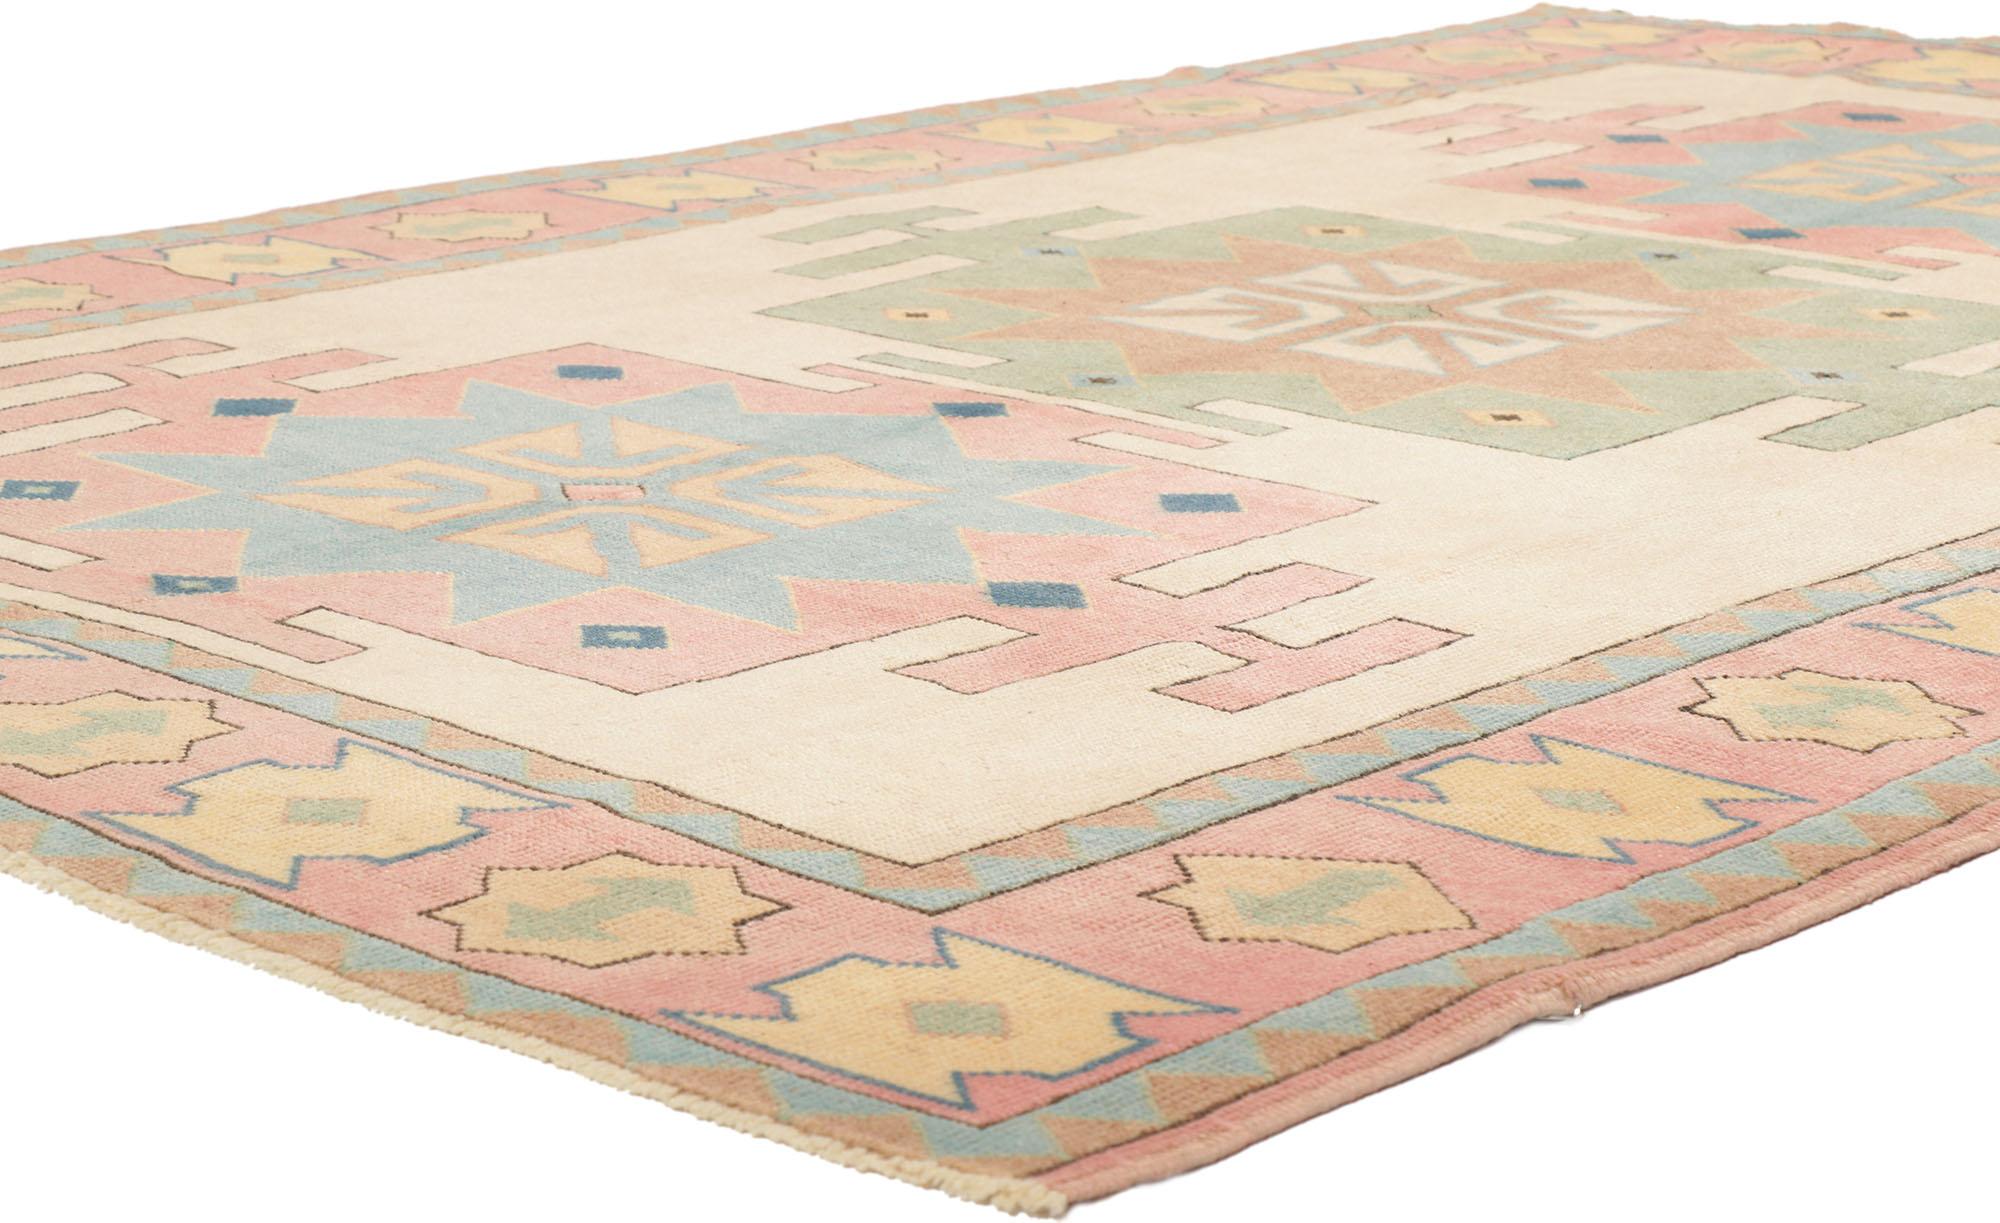 53696 Vintage Turkish Kars Rug with Geometric Pattern & Pastel Colors 6'01 x 8'11. Full of tiny details and an expressive tribal design, this hand-knotted wool vintage Turkish Kars rug is a captivating vision of woven beauty. Rich in symbolism and